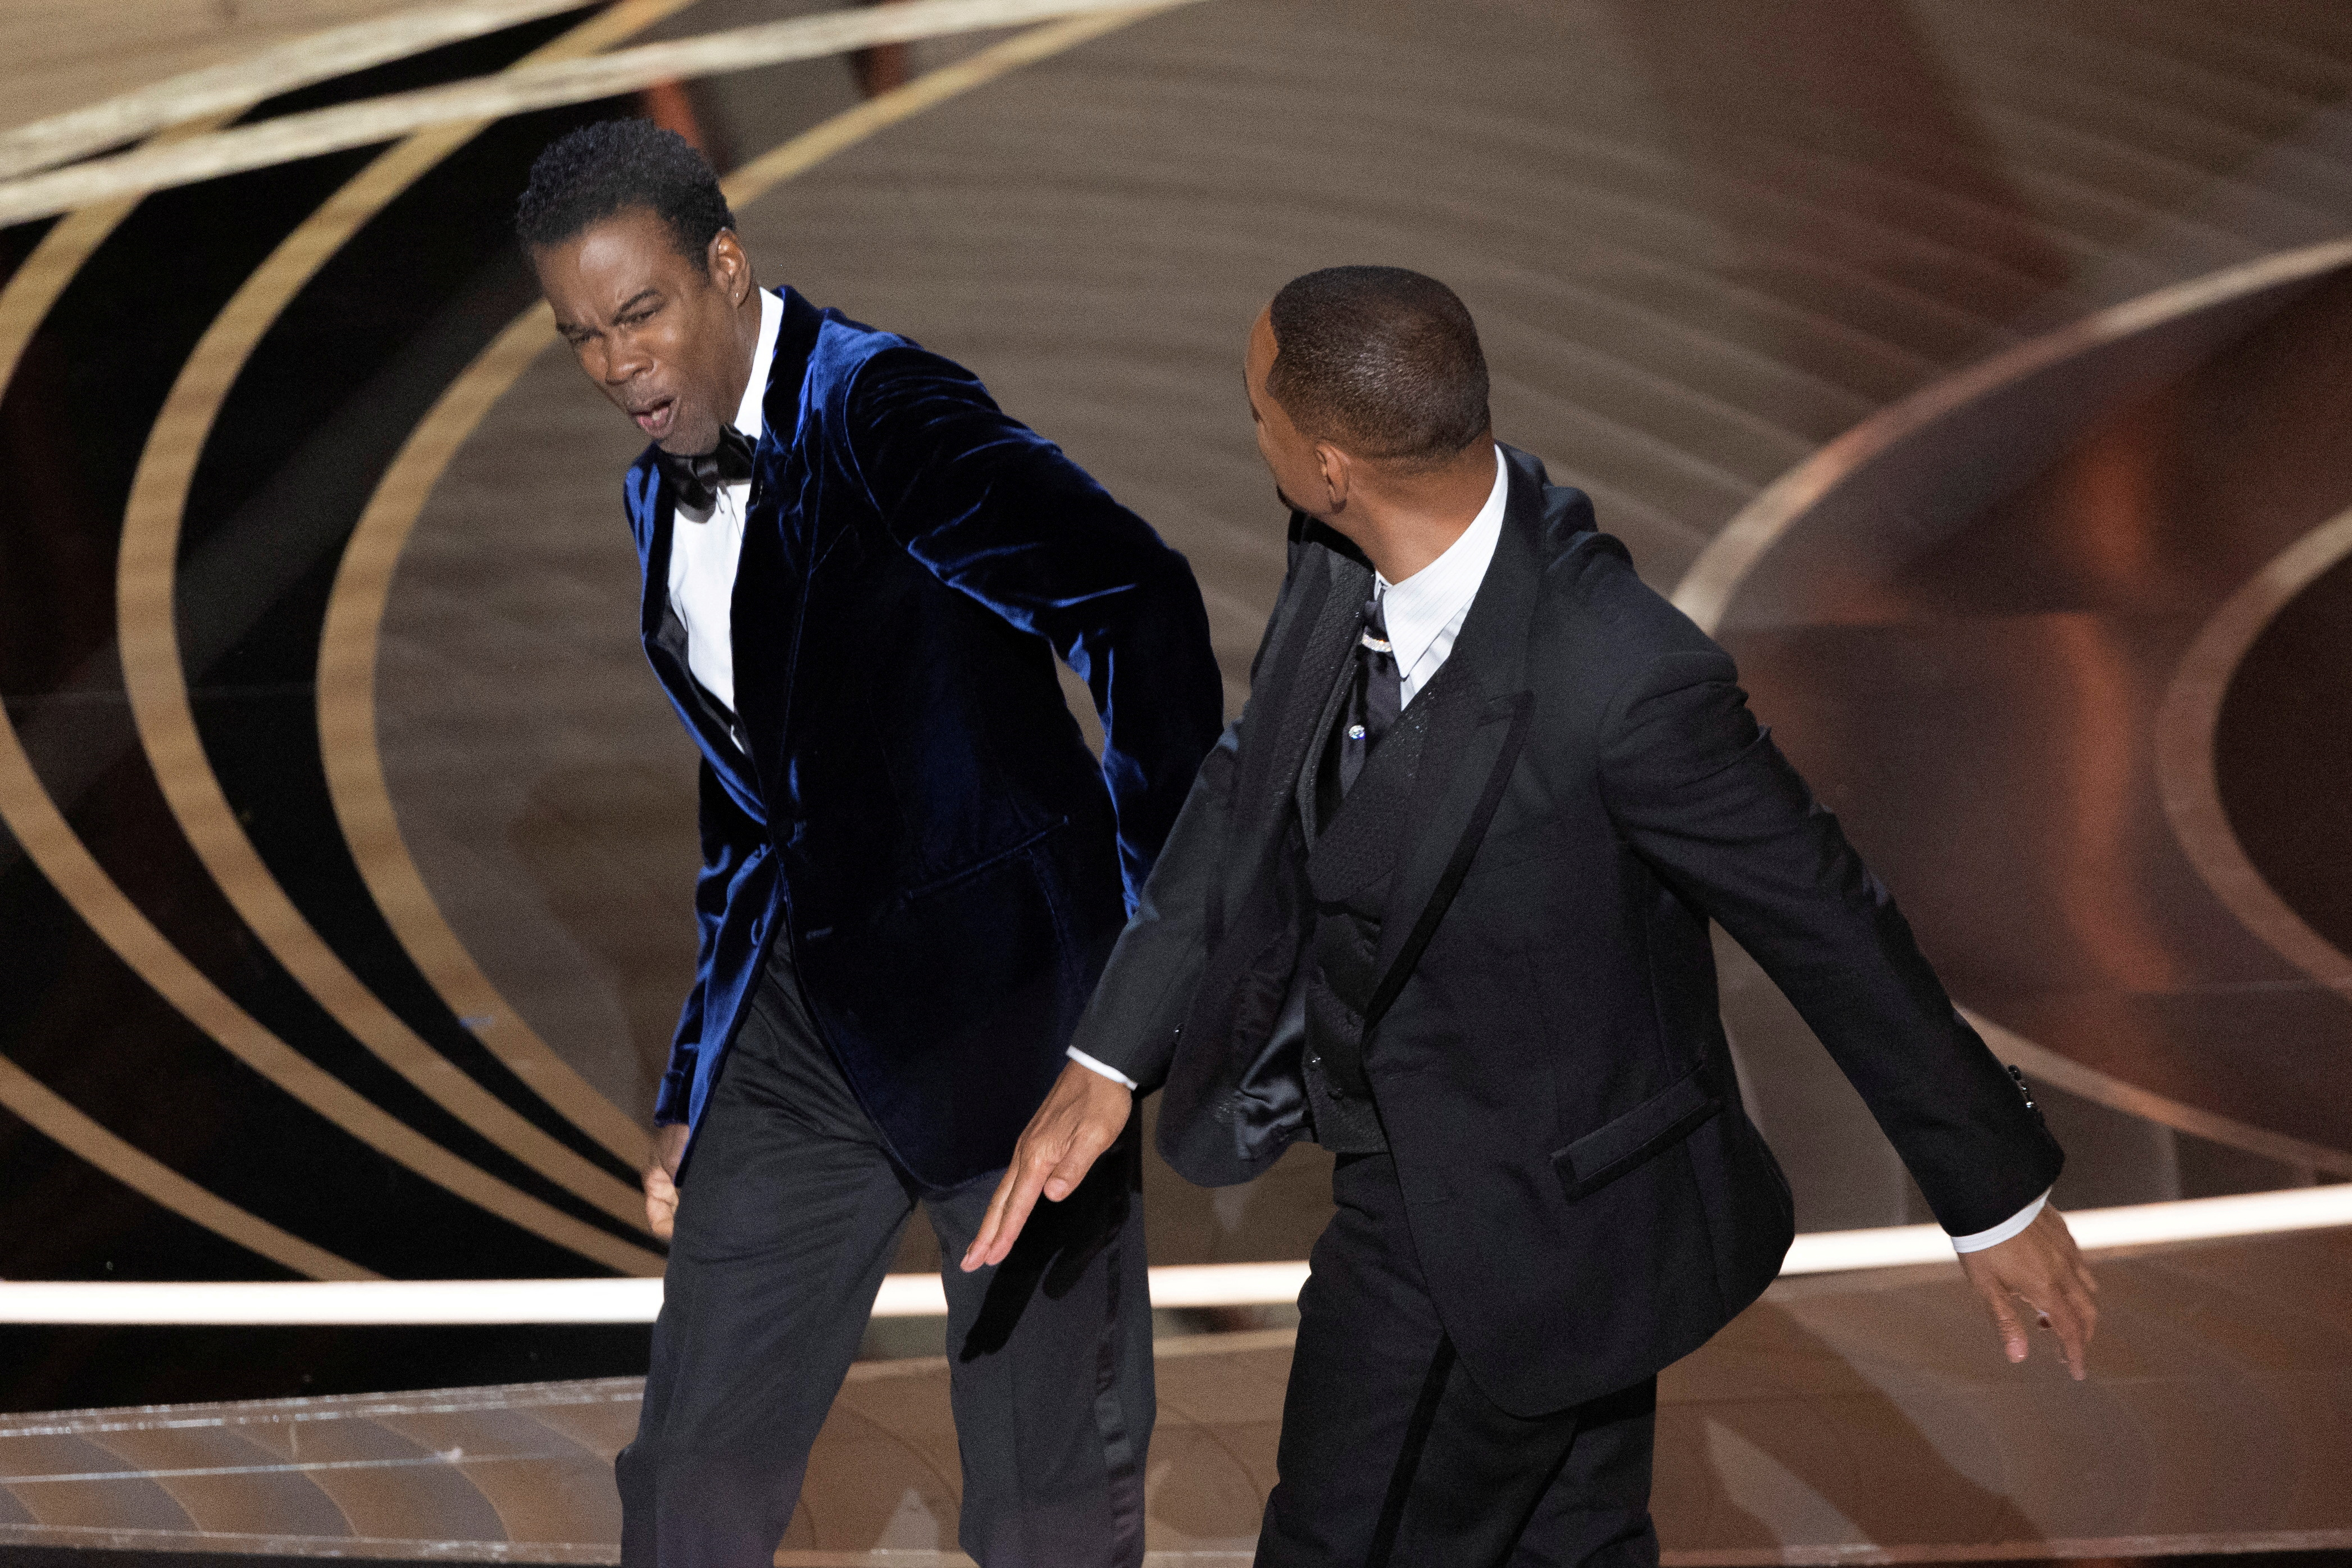 FILE PHOTO: Will Smith (R) hits Chris Rock as Rock spoke on stage during the 94th Academy Awards in Hollywood, Los Angeles, California, U.S., March 27, 2022. Picture taken March 27, 2022. REUTERS/Brian Snyder/File Photo